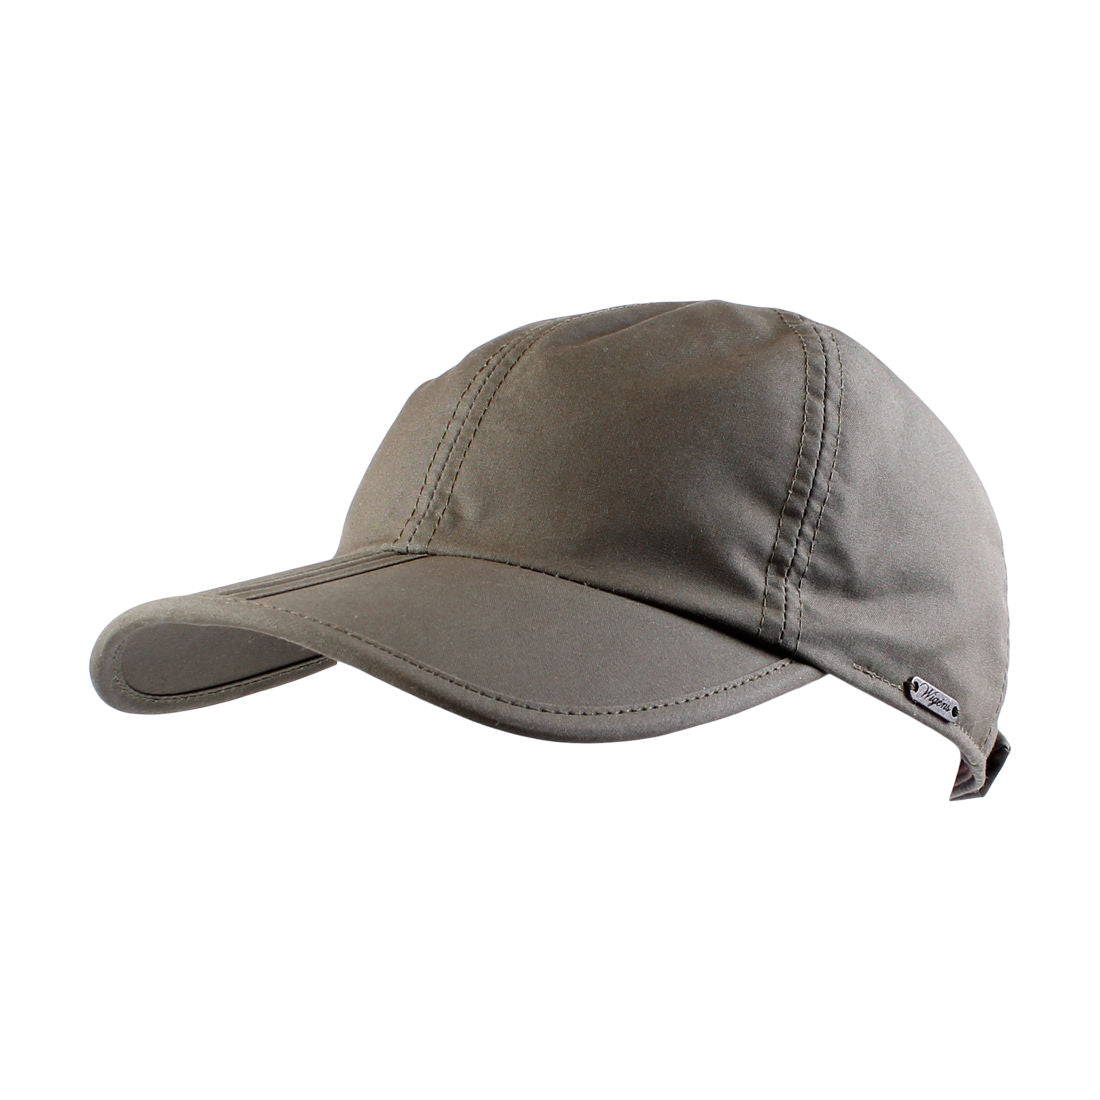 Waxed Cotton Baseball Classic Cap with Earflaps (Choice of Colors) by Wigens